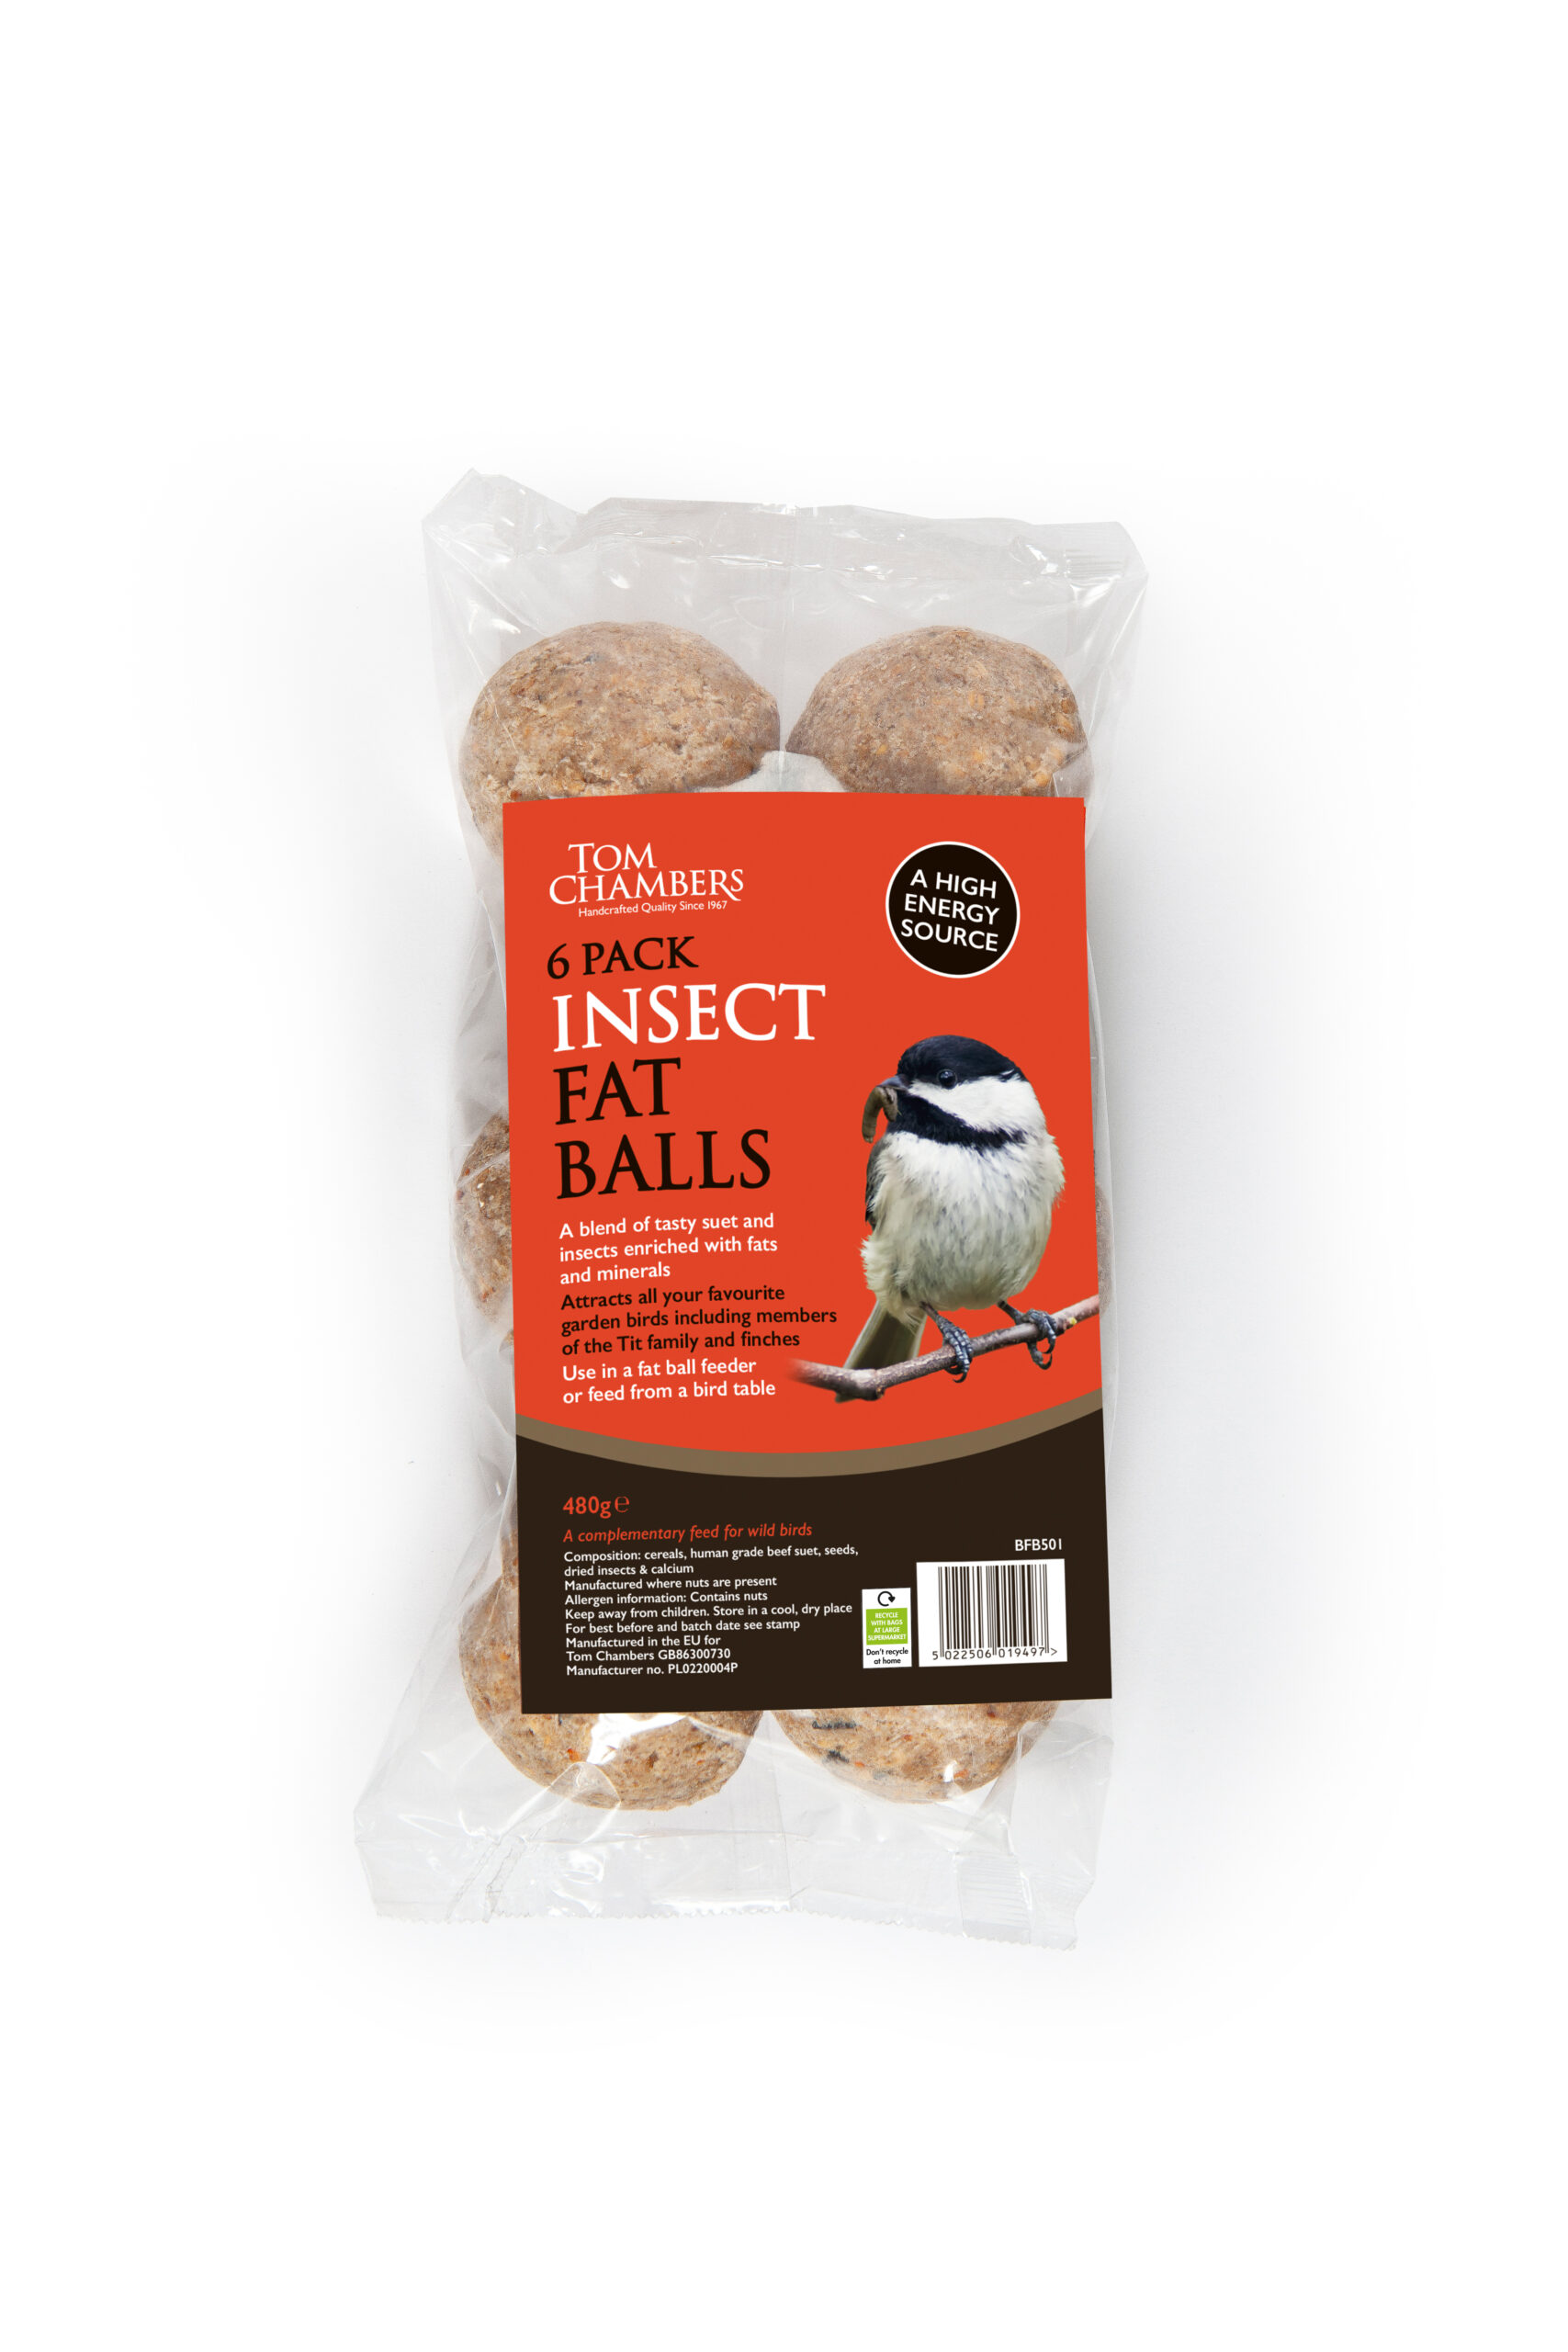 Tom chambers Fat Balls - 6 pack - Insect - No Nets